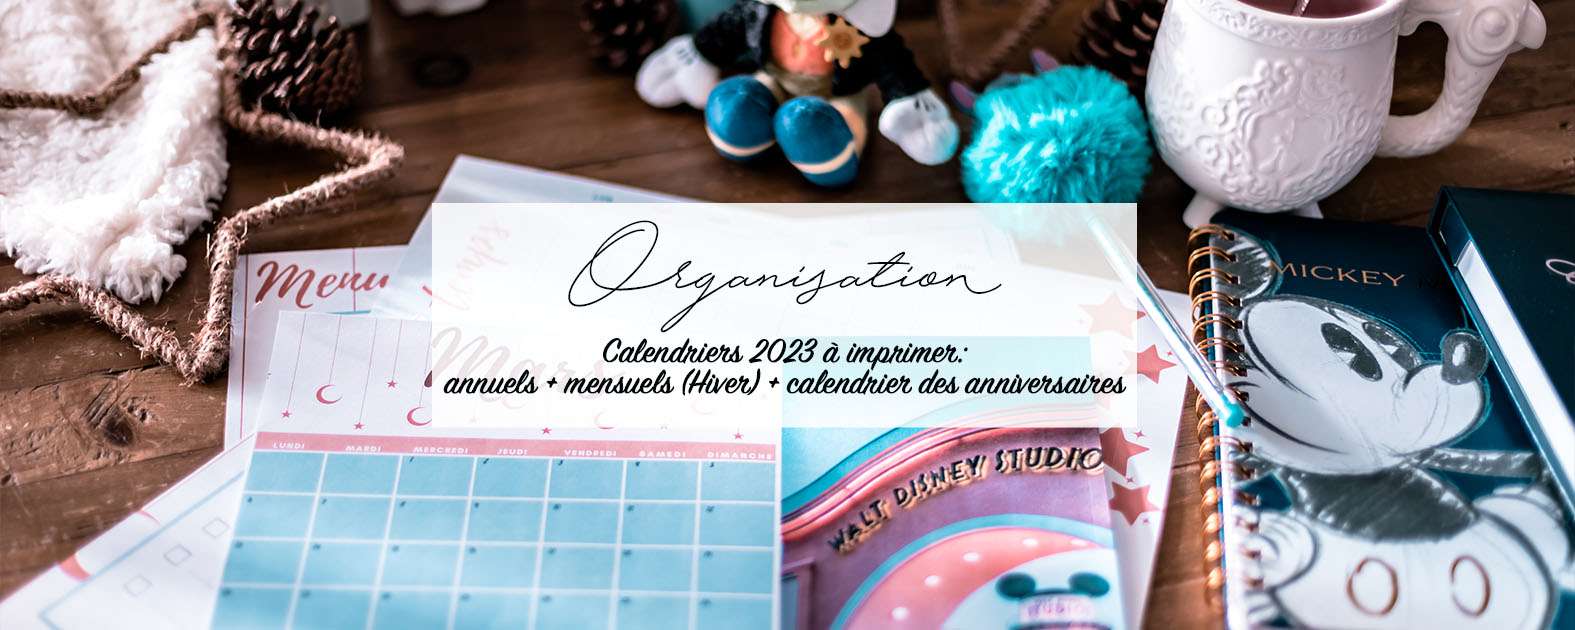 Calendriers 2023 mensuels - blog lifestyle